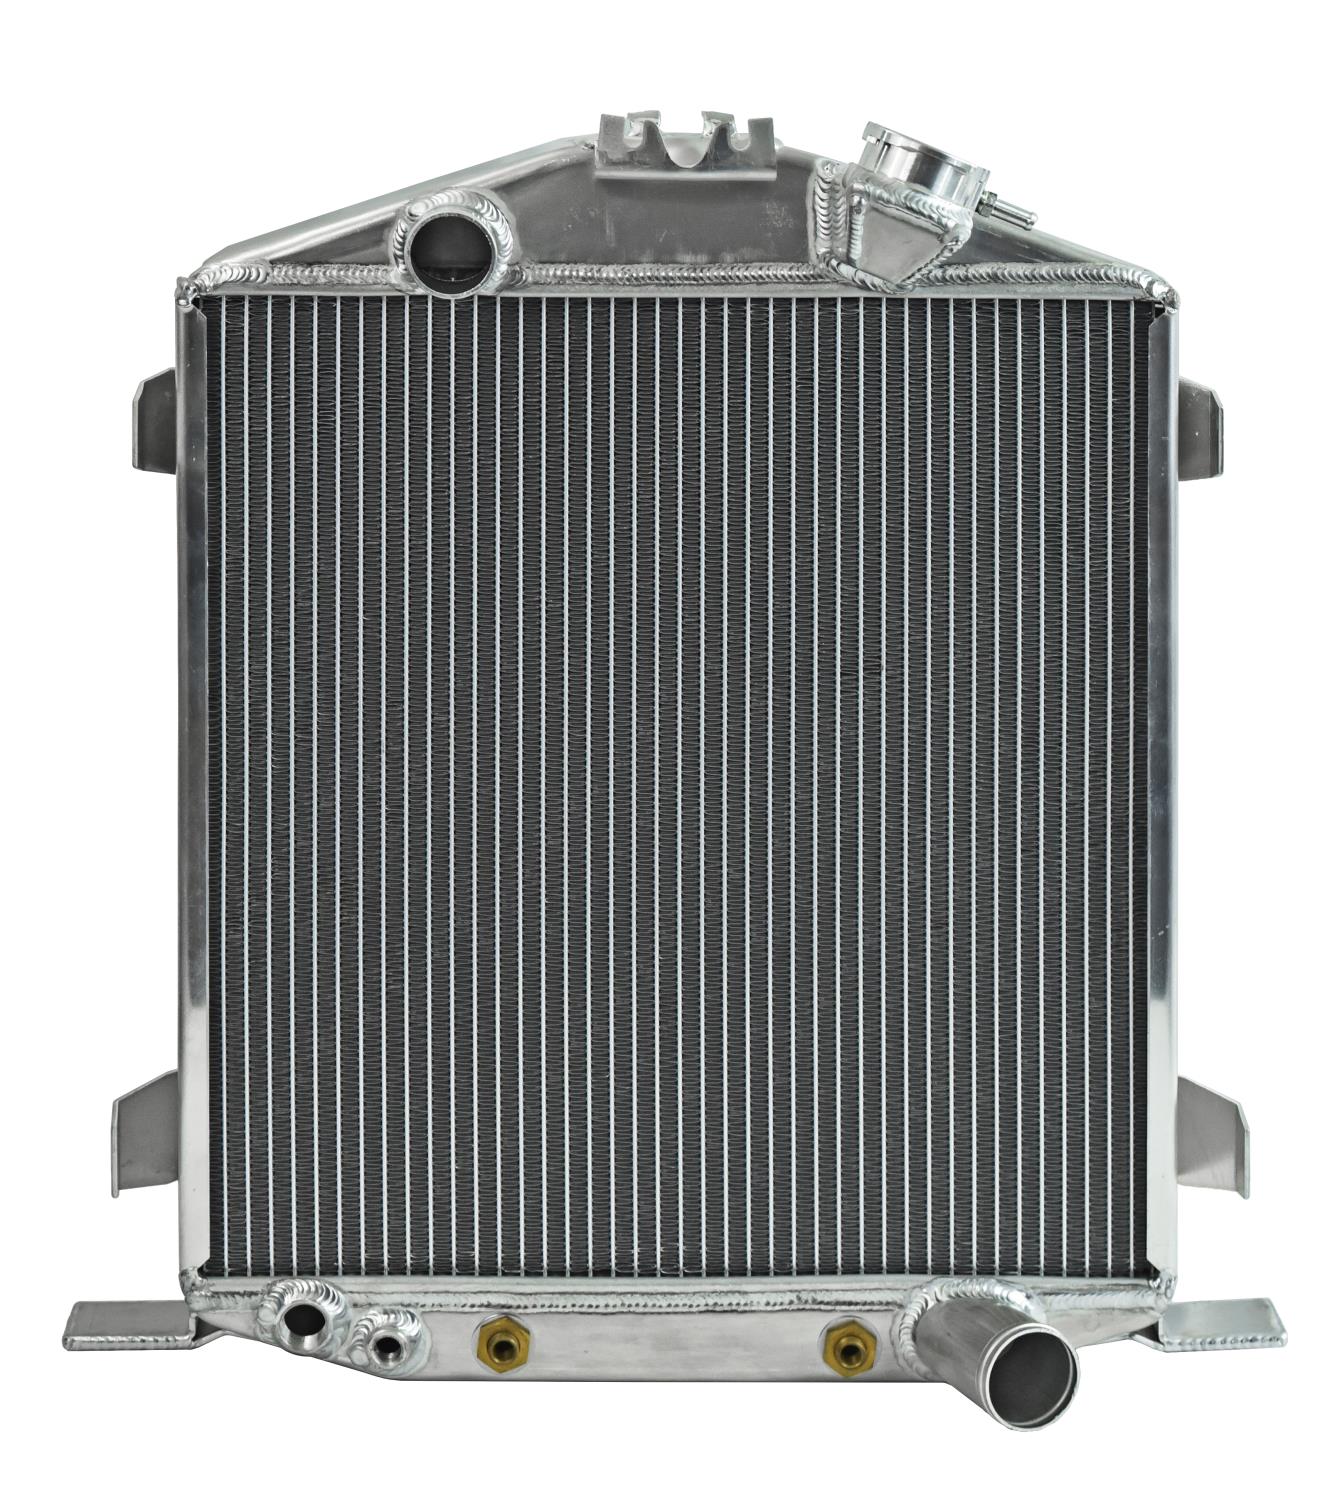 Aluminum Radiator for 1932 Ford LO-BOY with Chevy V8 Engine & Chopped Grill